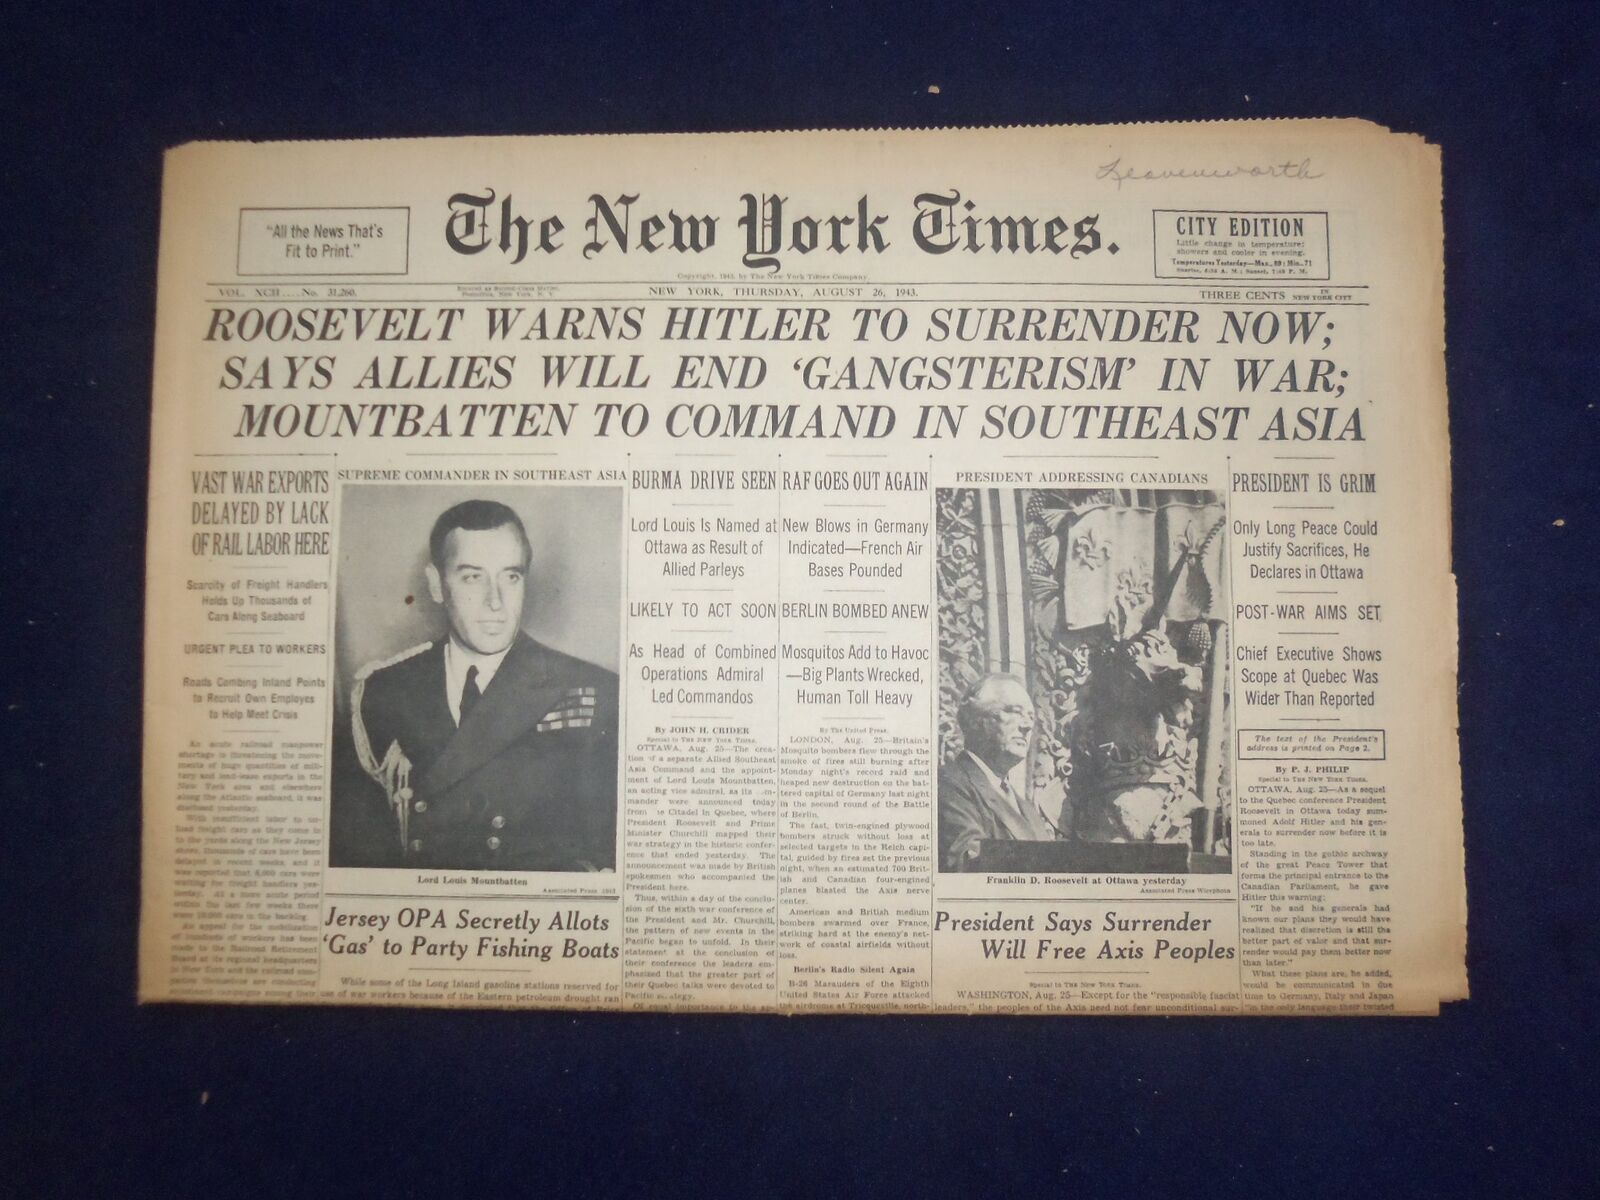 1943 AUG 26 NEW YORK TIMES - ROOSEVELT WARNS HITLER TO SURRENDER NOW - NP 6552